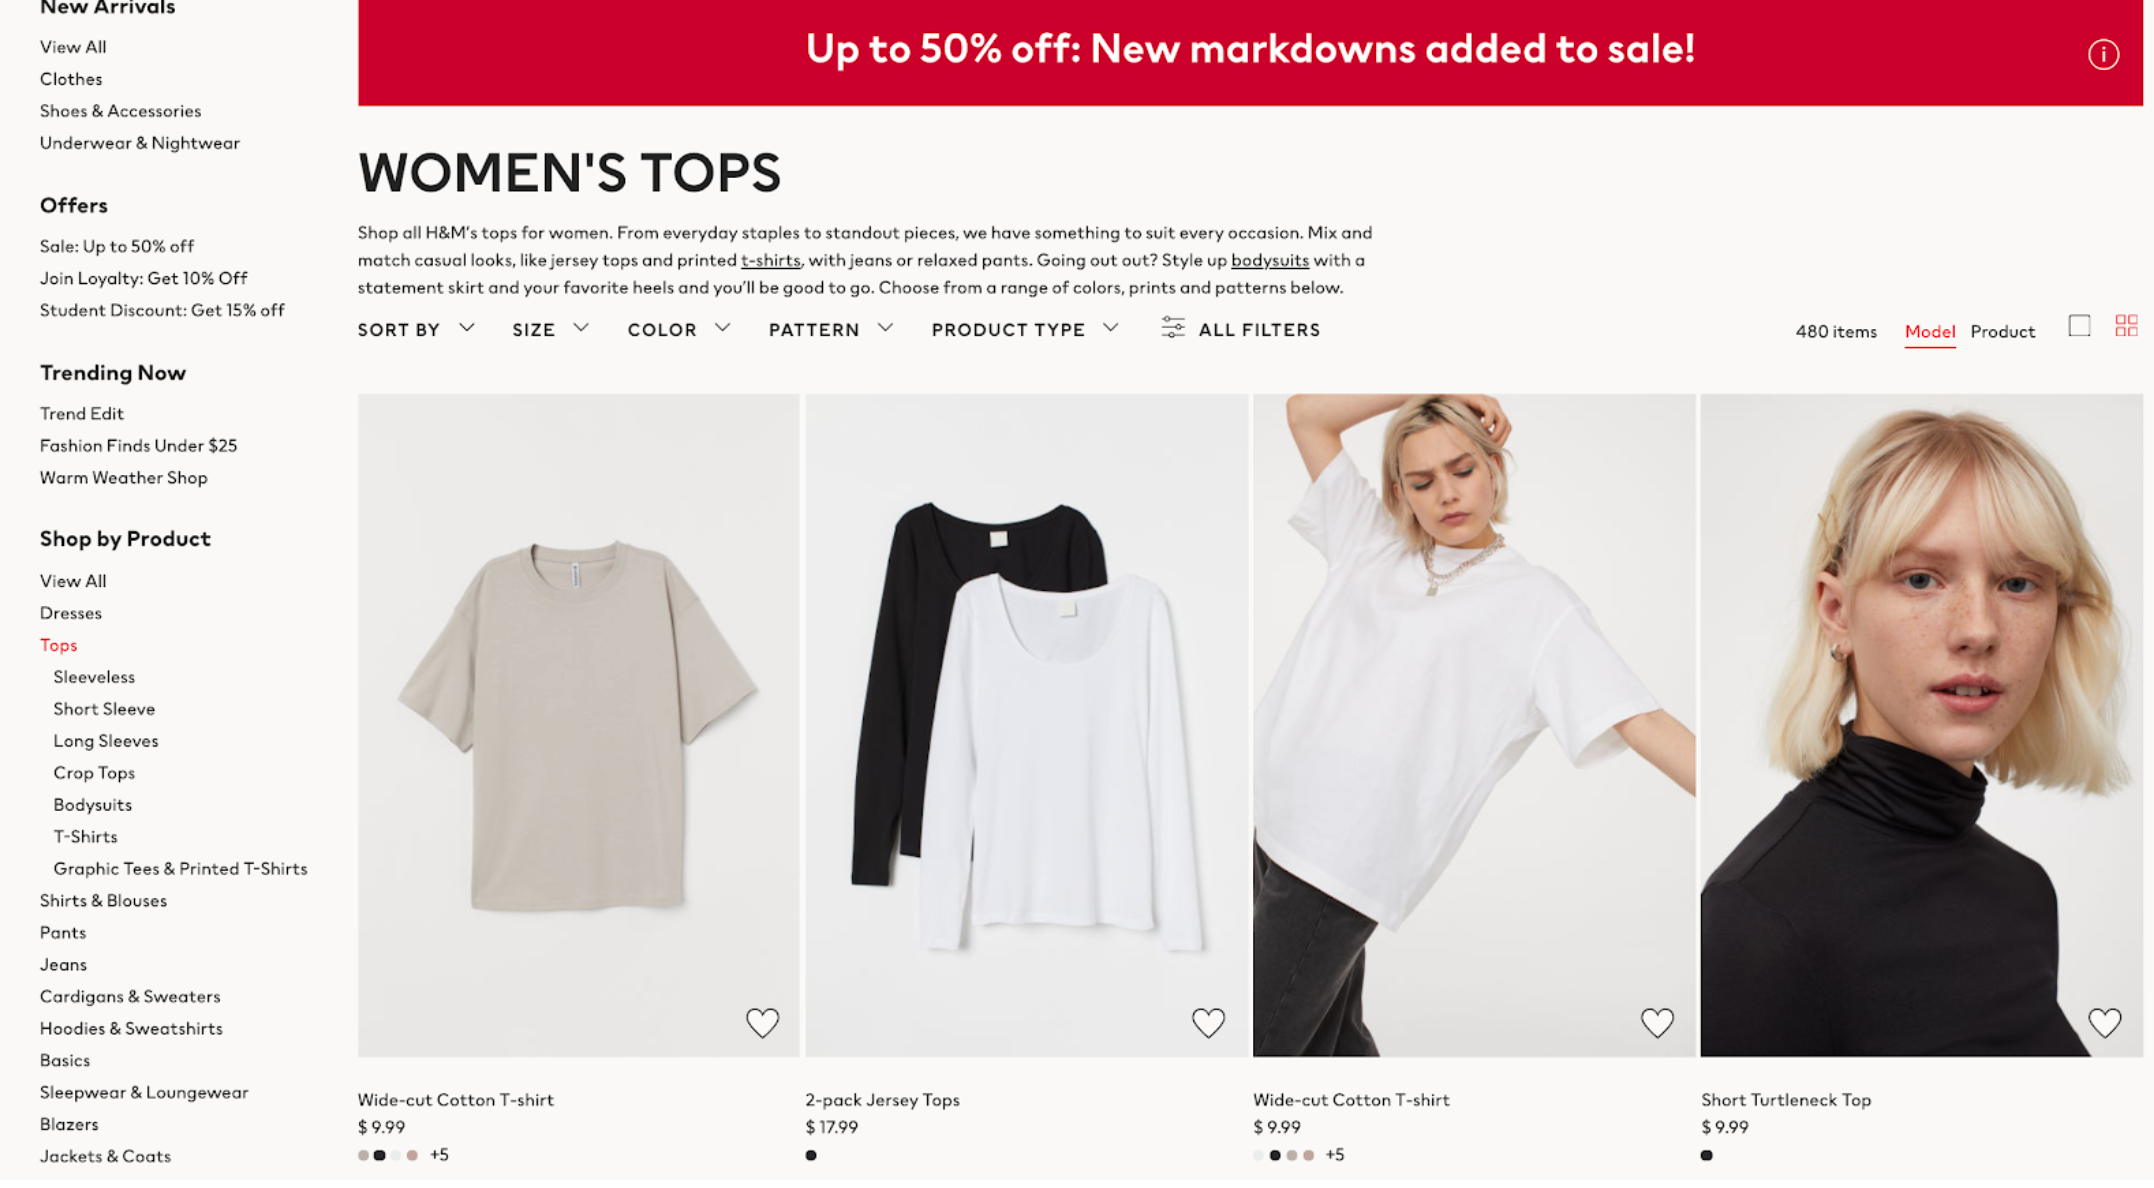 H&M Category Page for women's tops